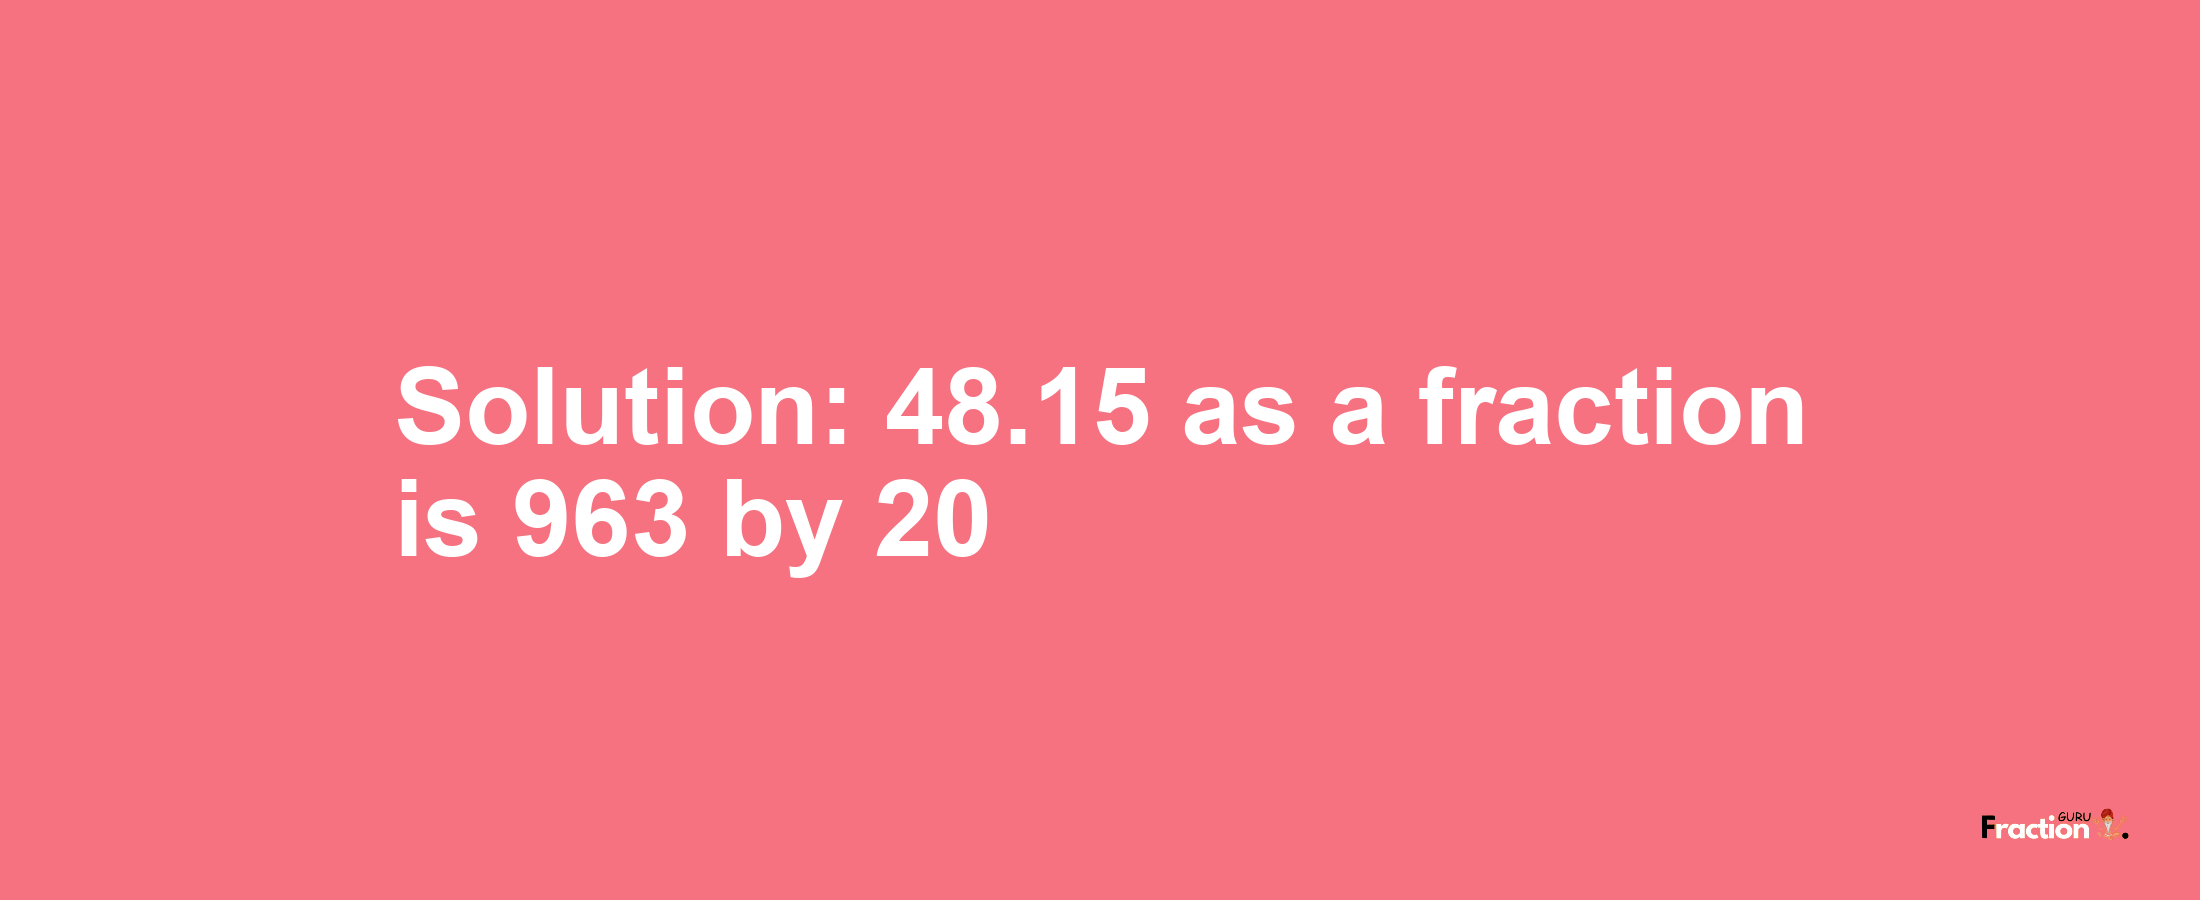 Solution:48.15 as a fraction is 963/20